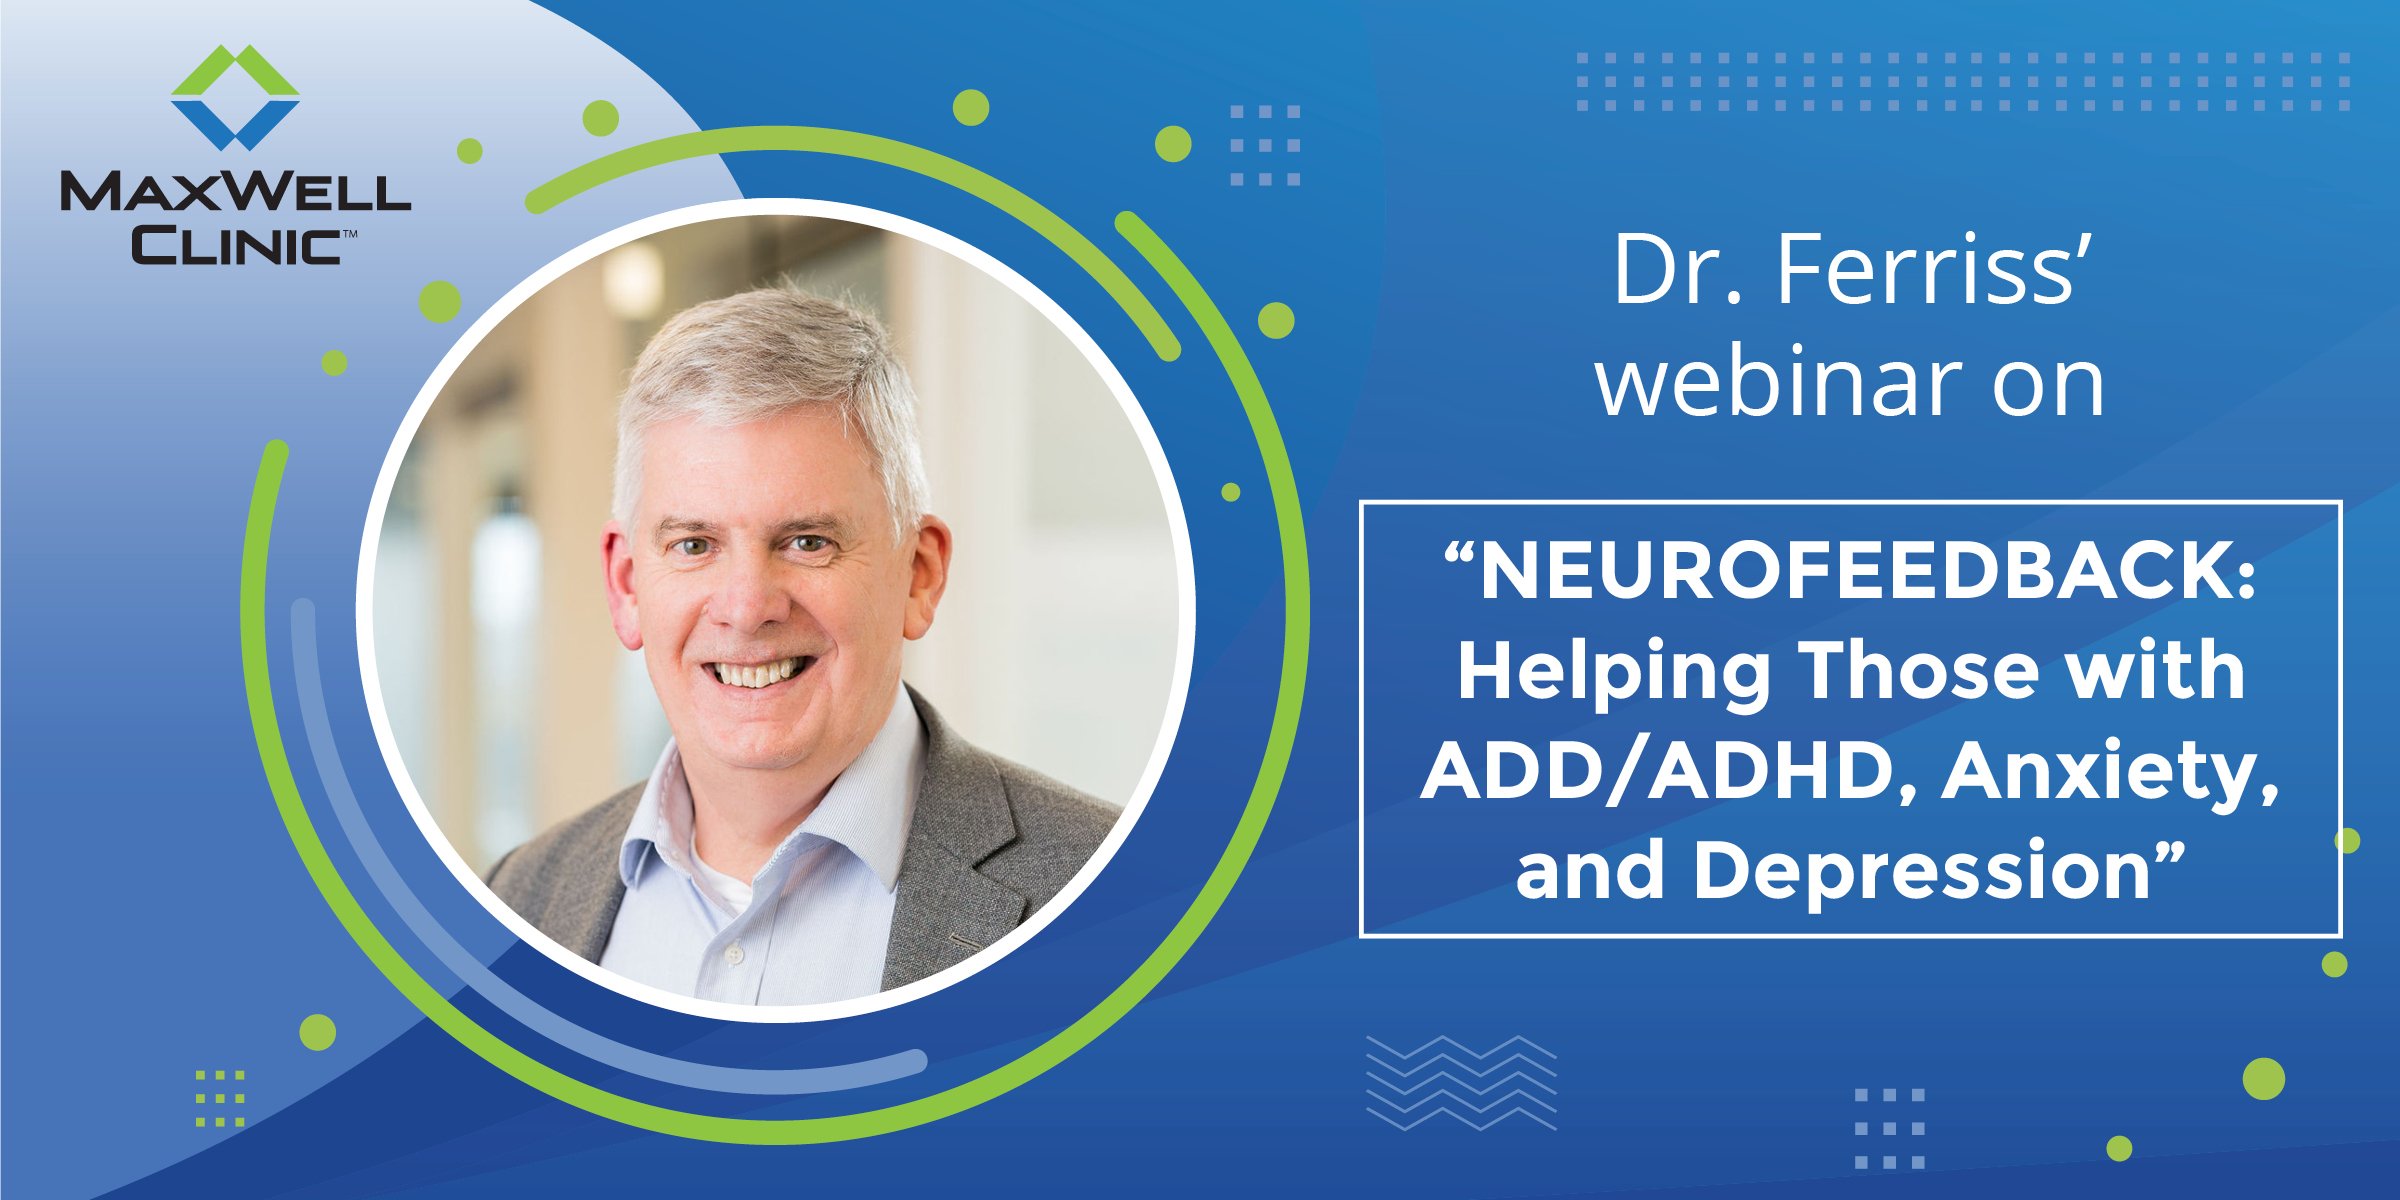 Neurofeedback: Helping Those with ADD/ADHD, Anxiety, and Depression David Ferriss, M.D.